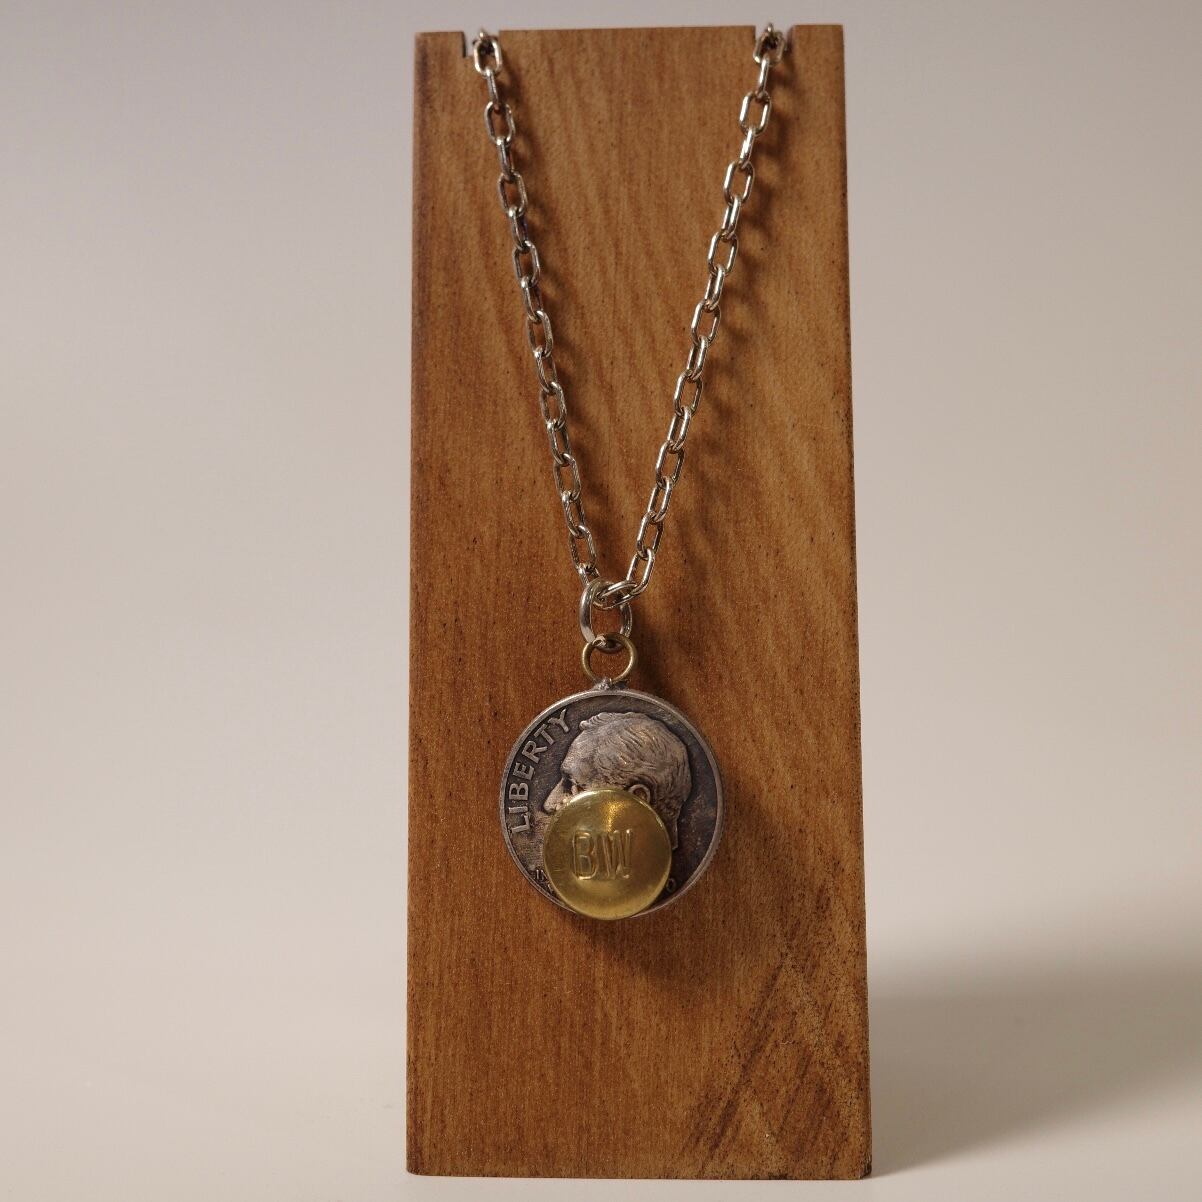 How to make a coin necklace